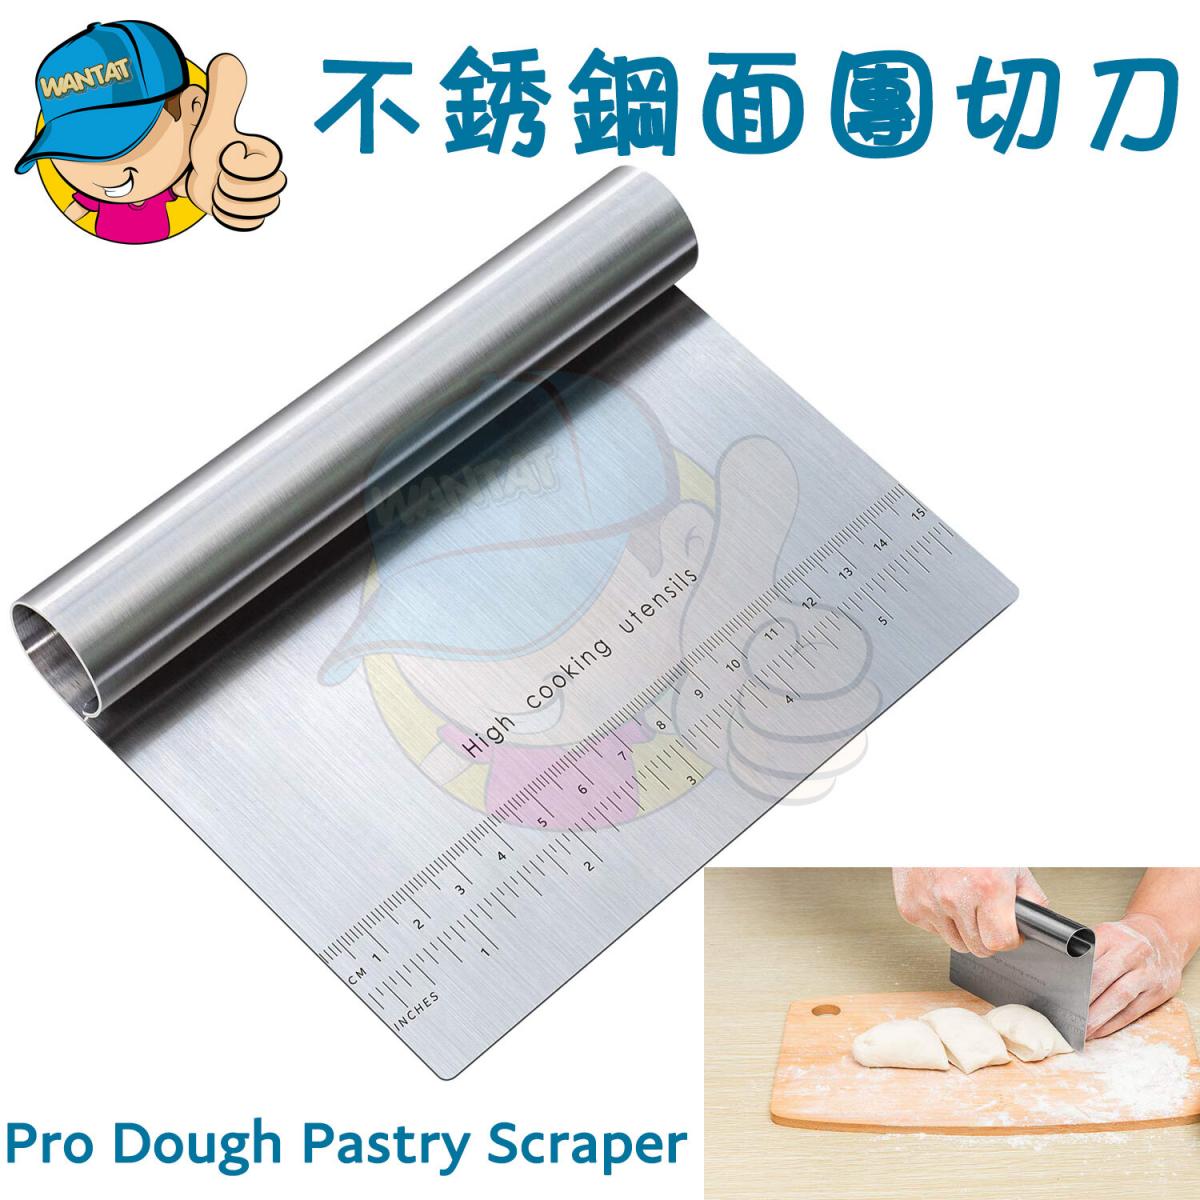  Pro Dough Pastry Scraper/Cutter/Chopper Stainless Steel Mirror  Polished with Measuring Scale Multipurpose- Cake, Pizza Cutter - Pastry  Bread Separator Scale Knife: Home & Kitchen